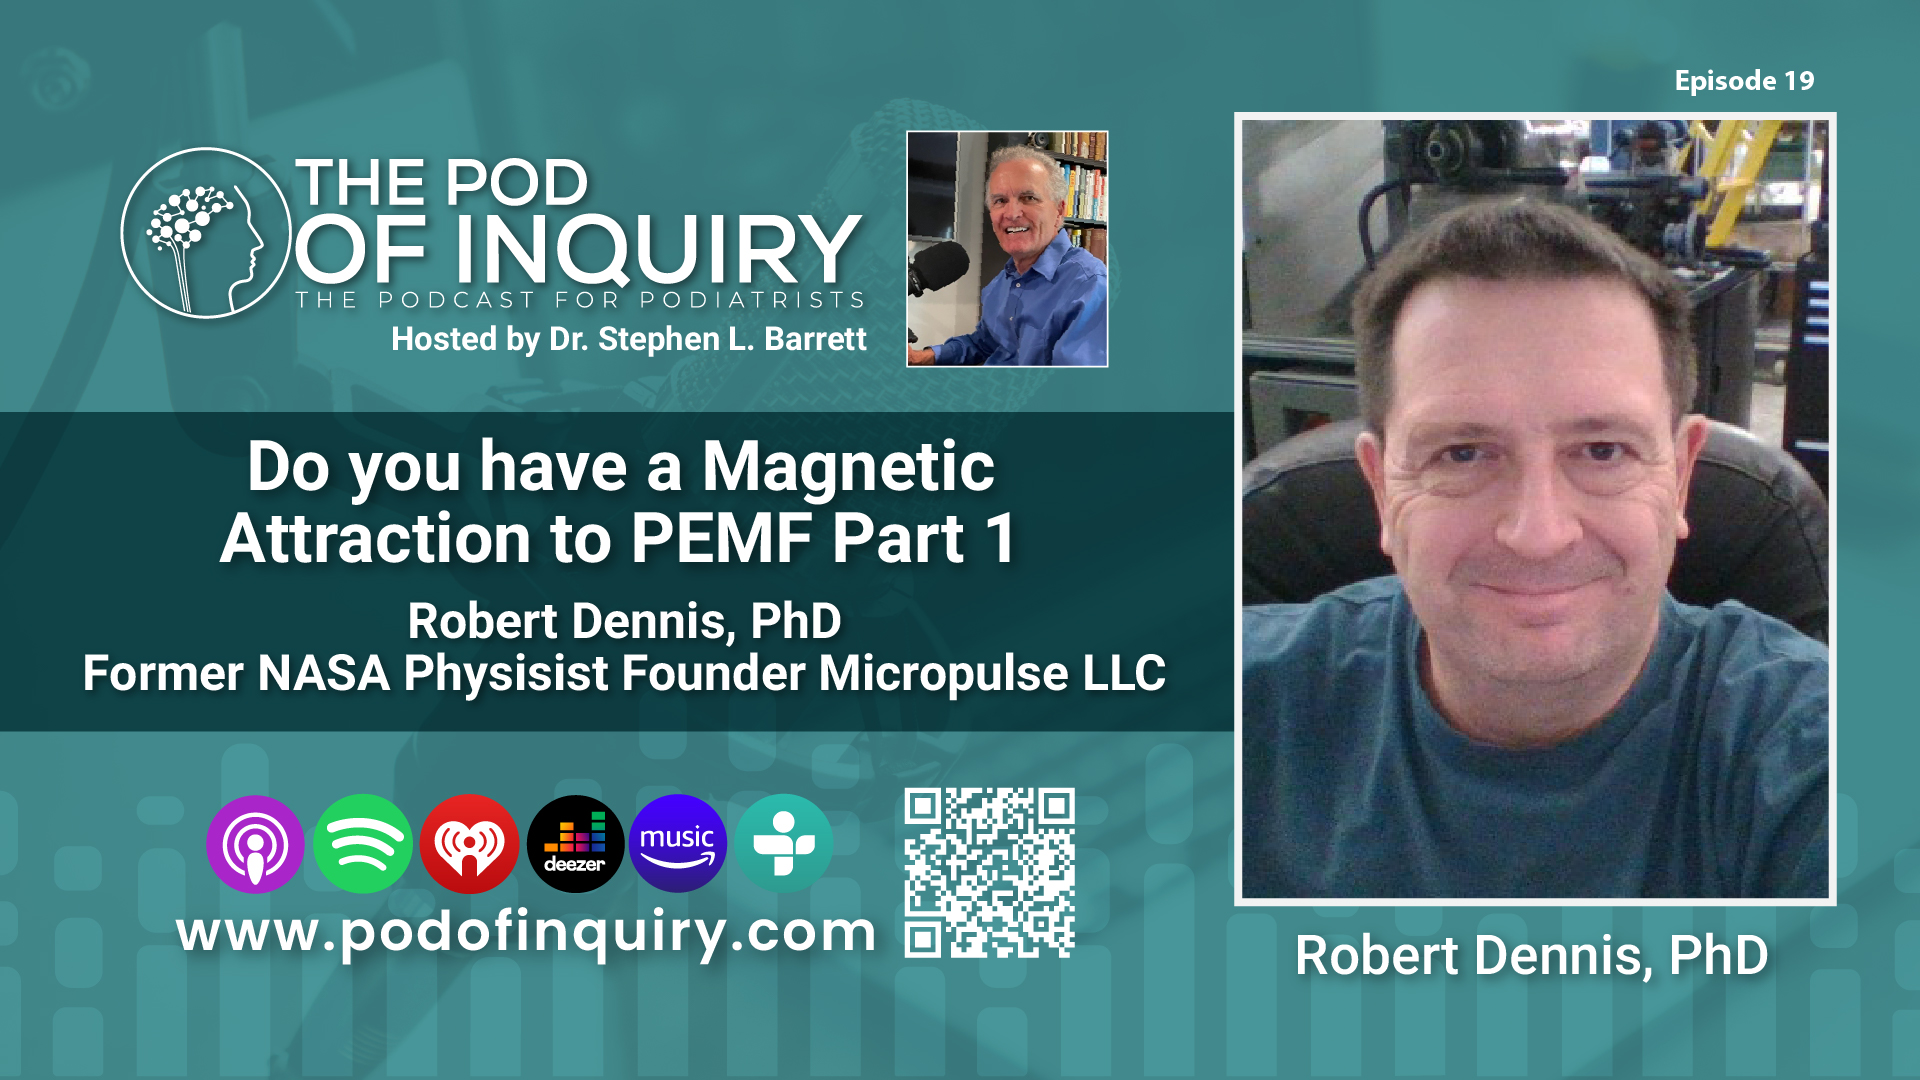 Do you have a Magnetic Attraction to PEMF Part 1